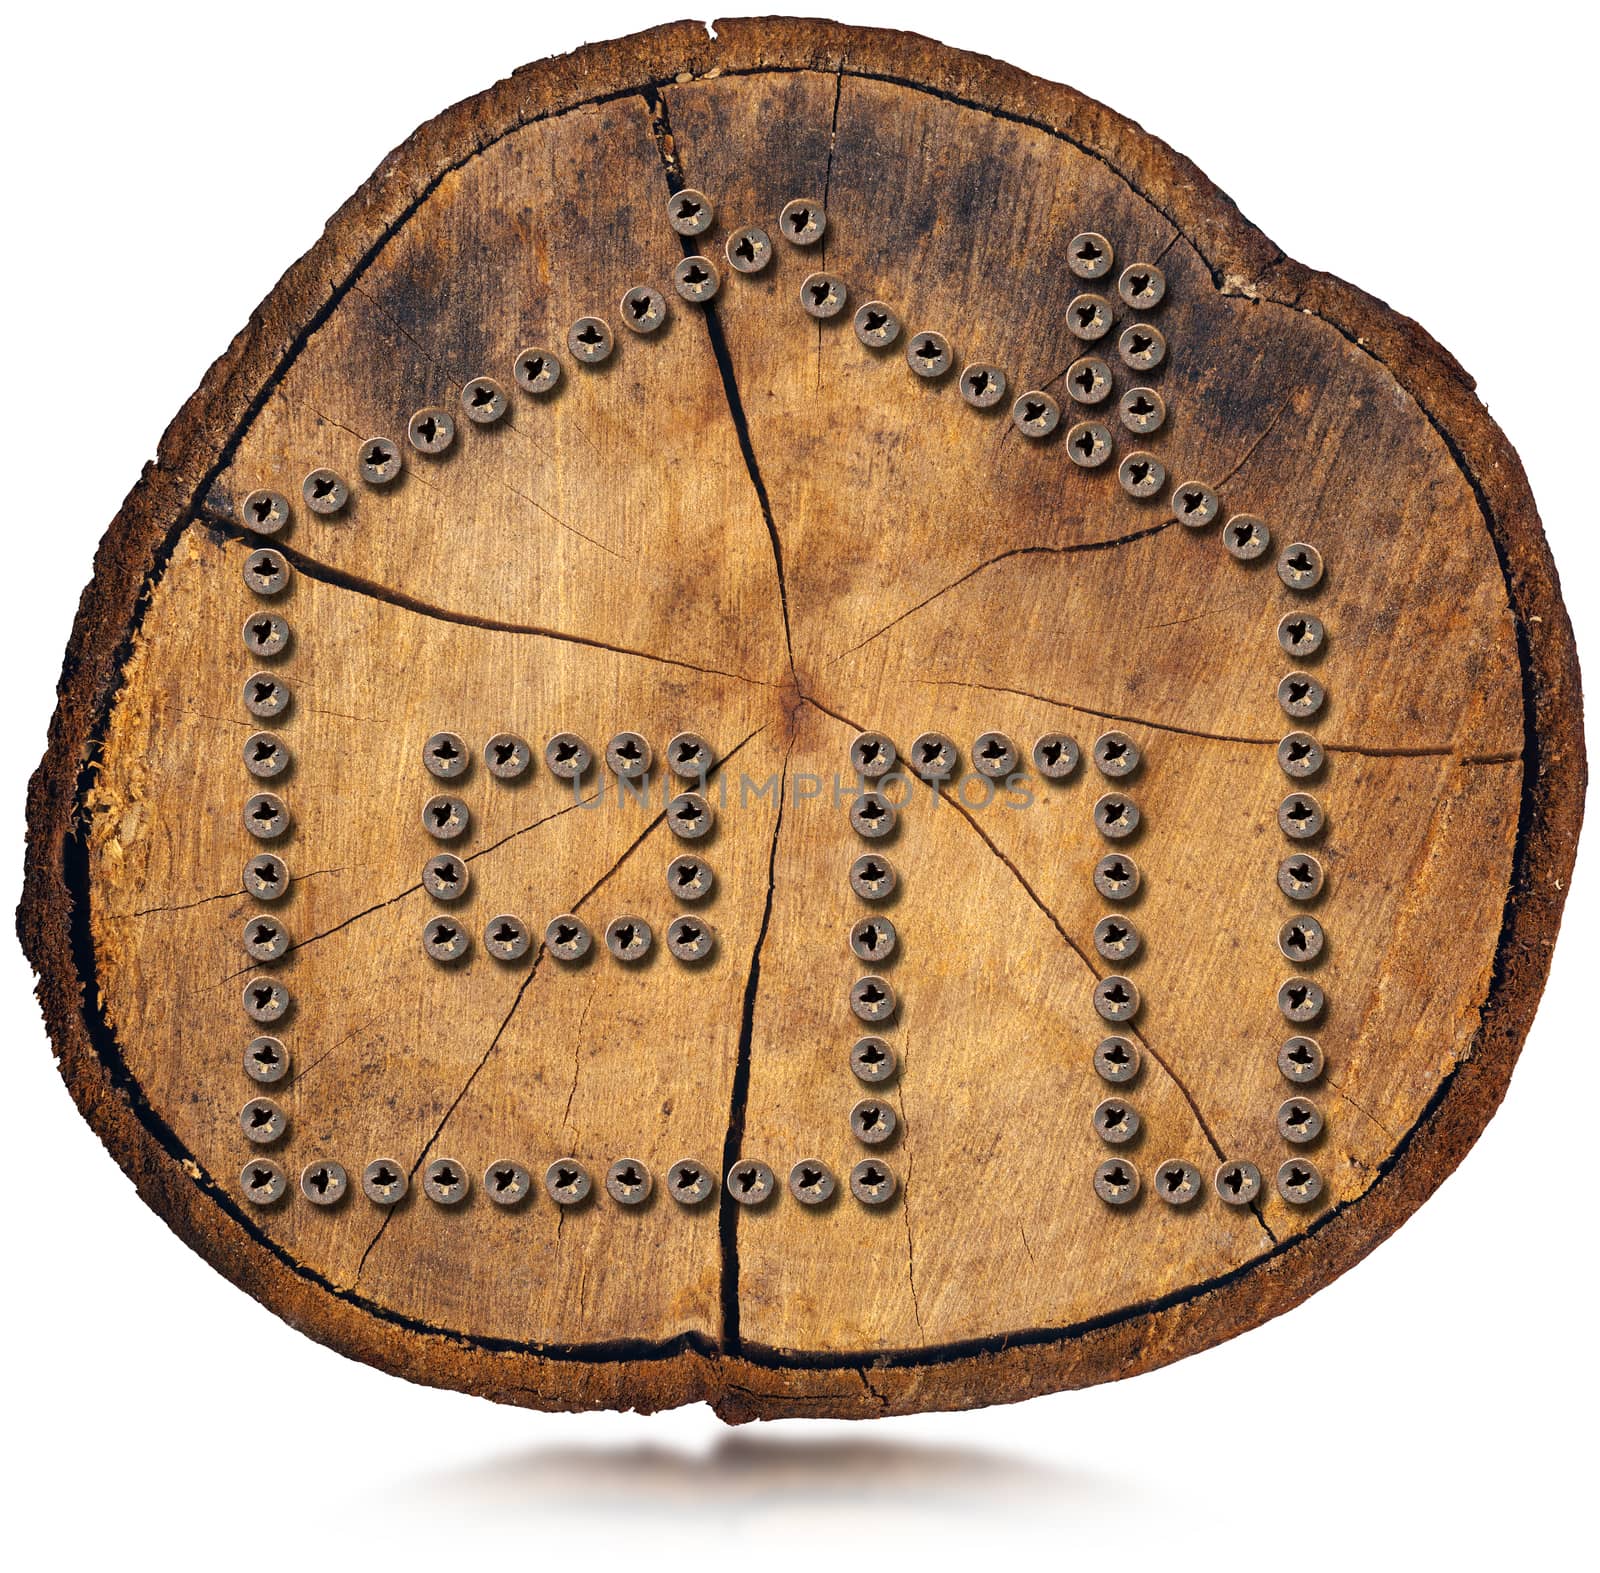 House Symbol - Screws on Tree Trunk by catalby